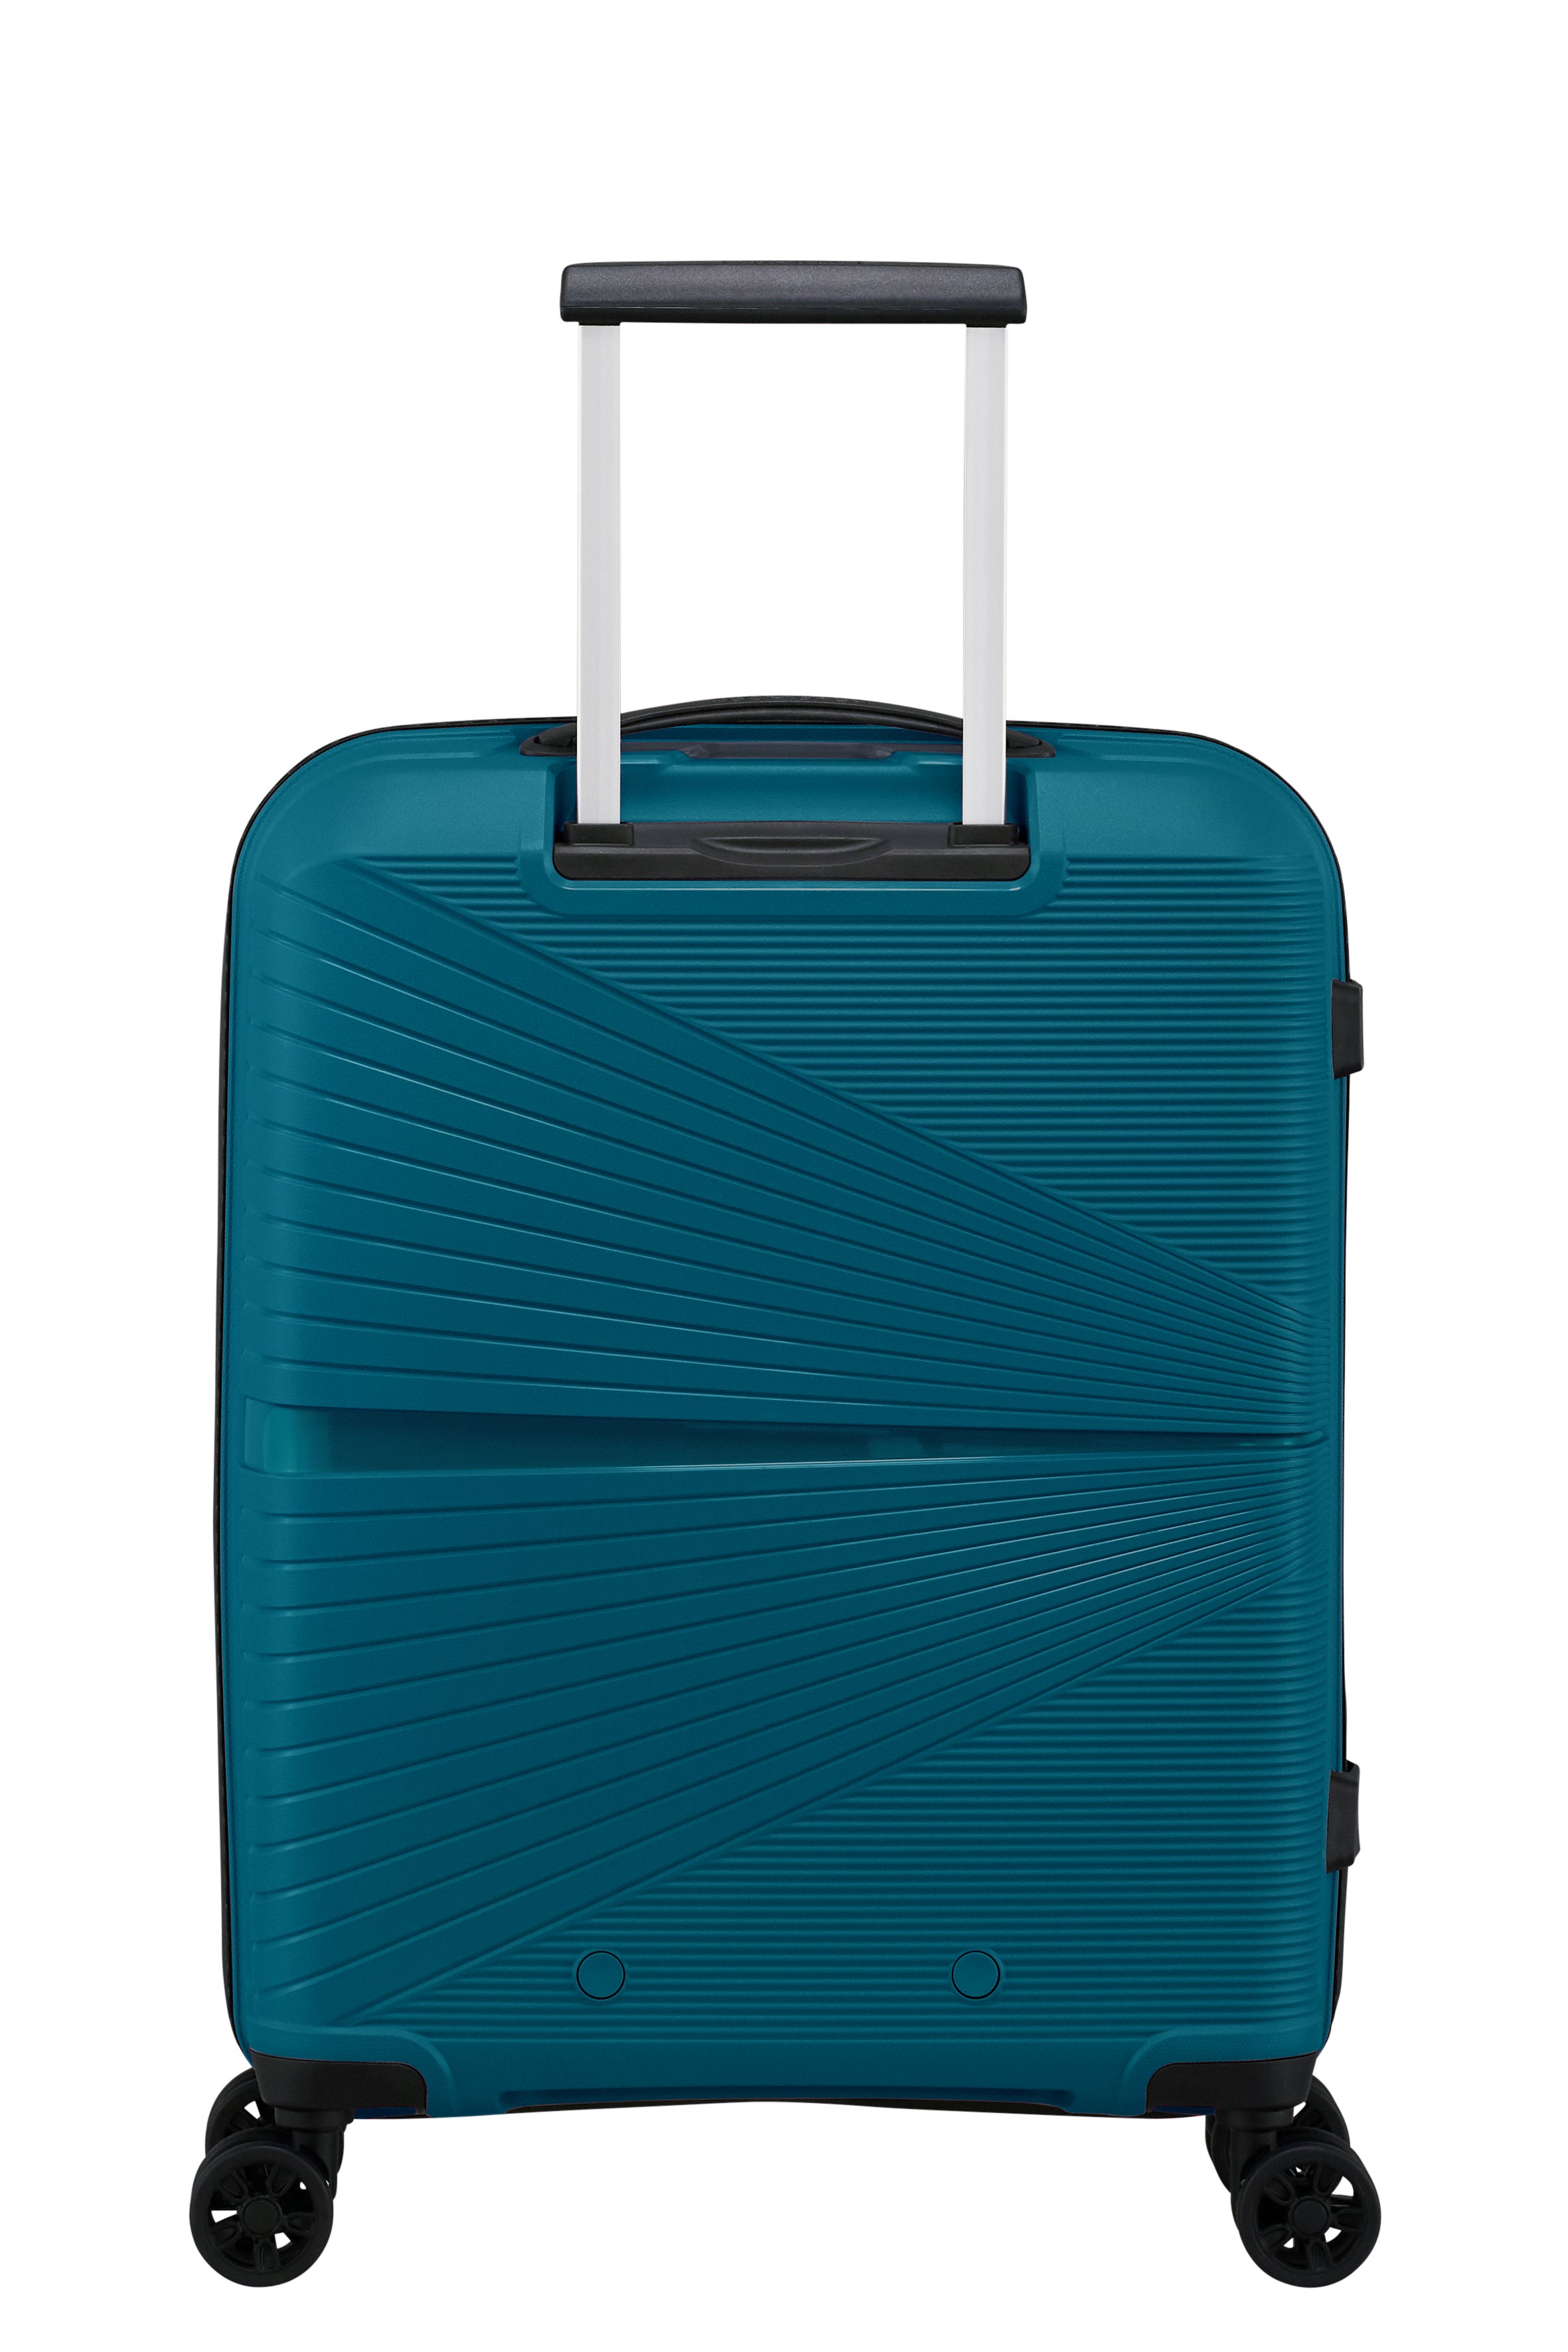 American Tourister - Airconic 55cm Small Suitcase - Deep Ocean-4